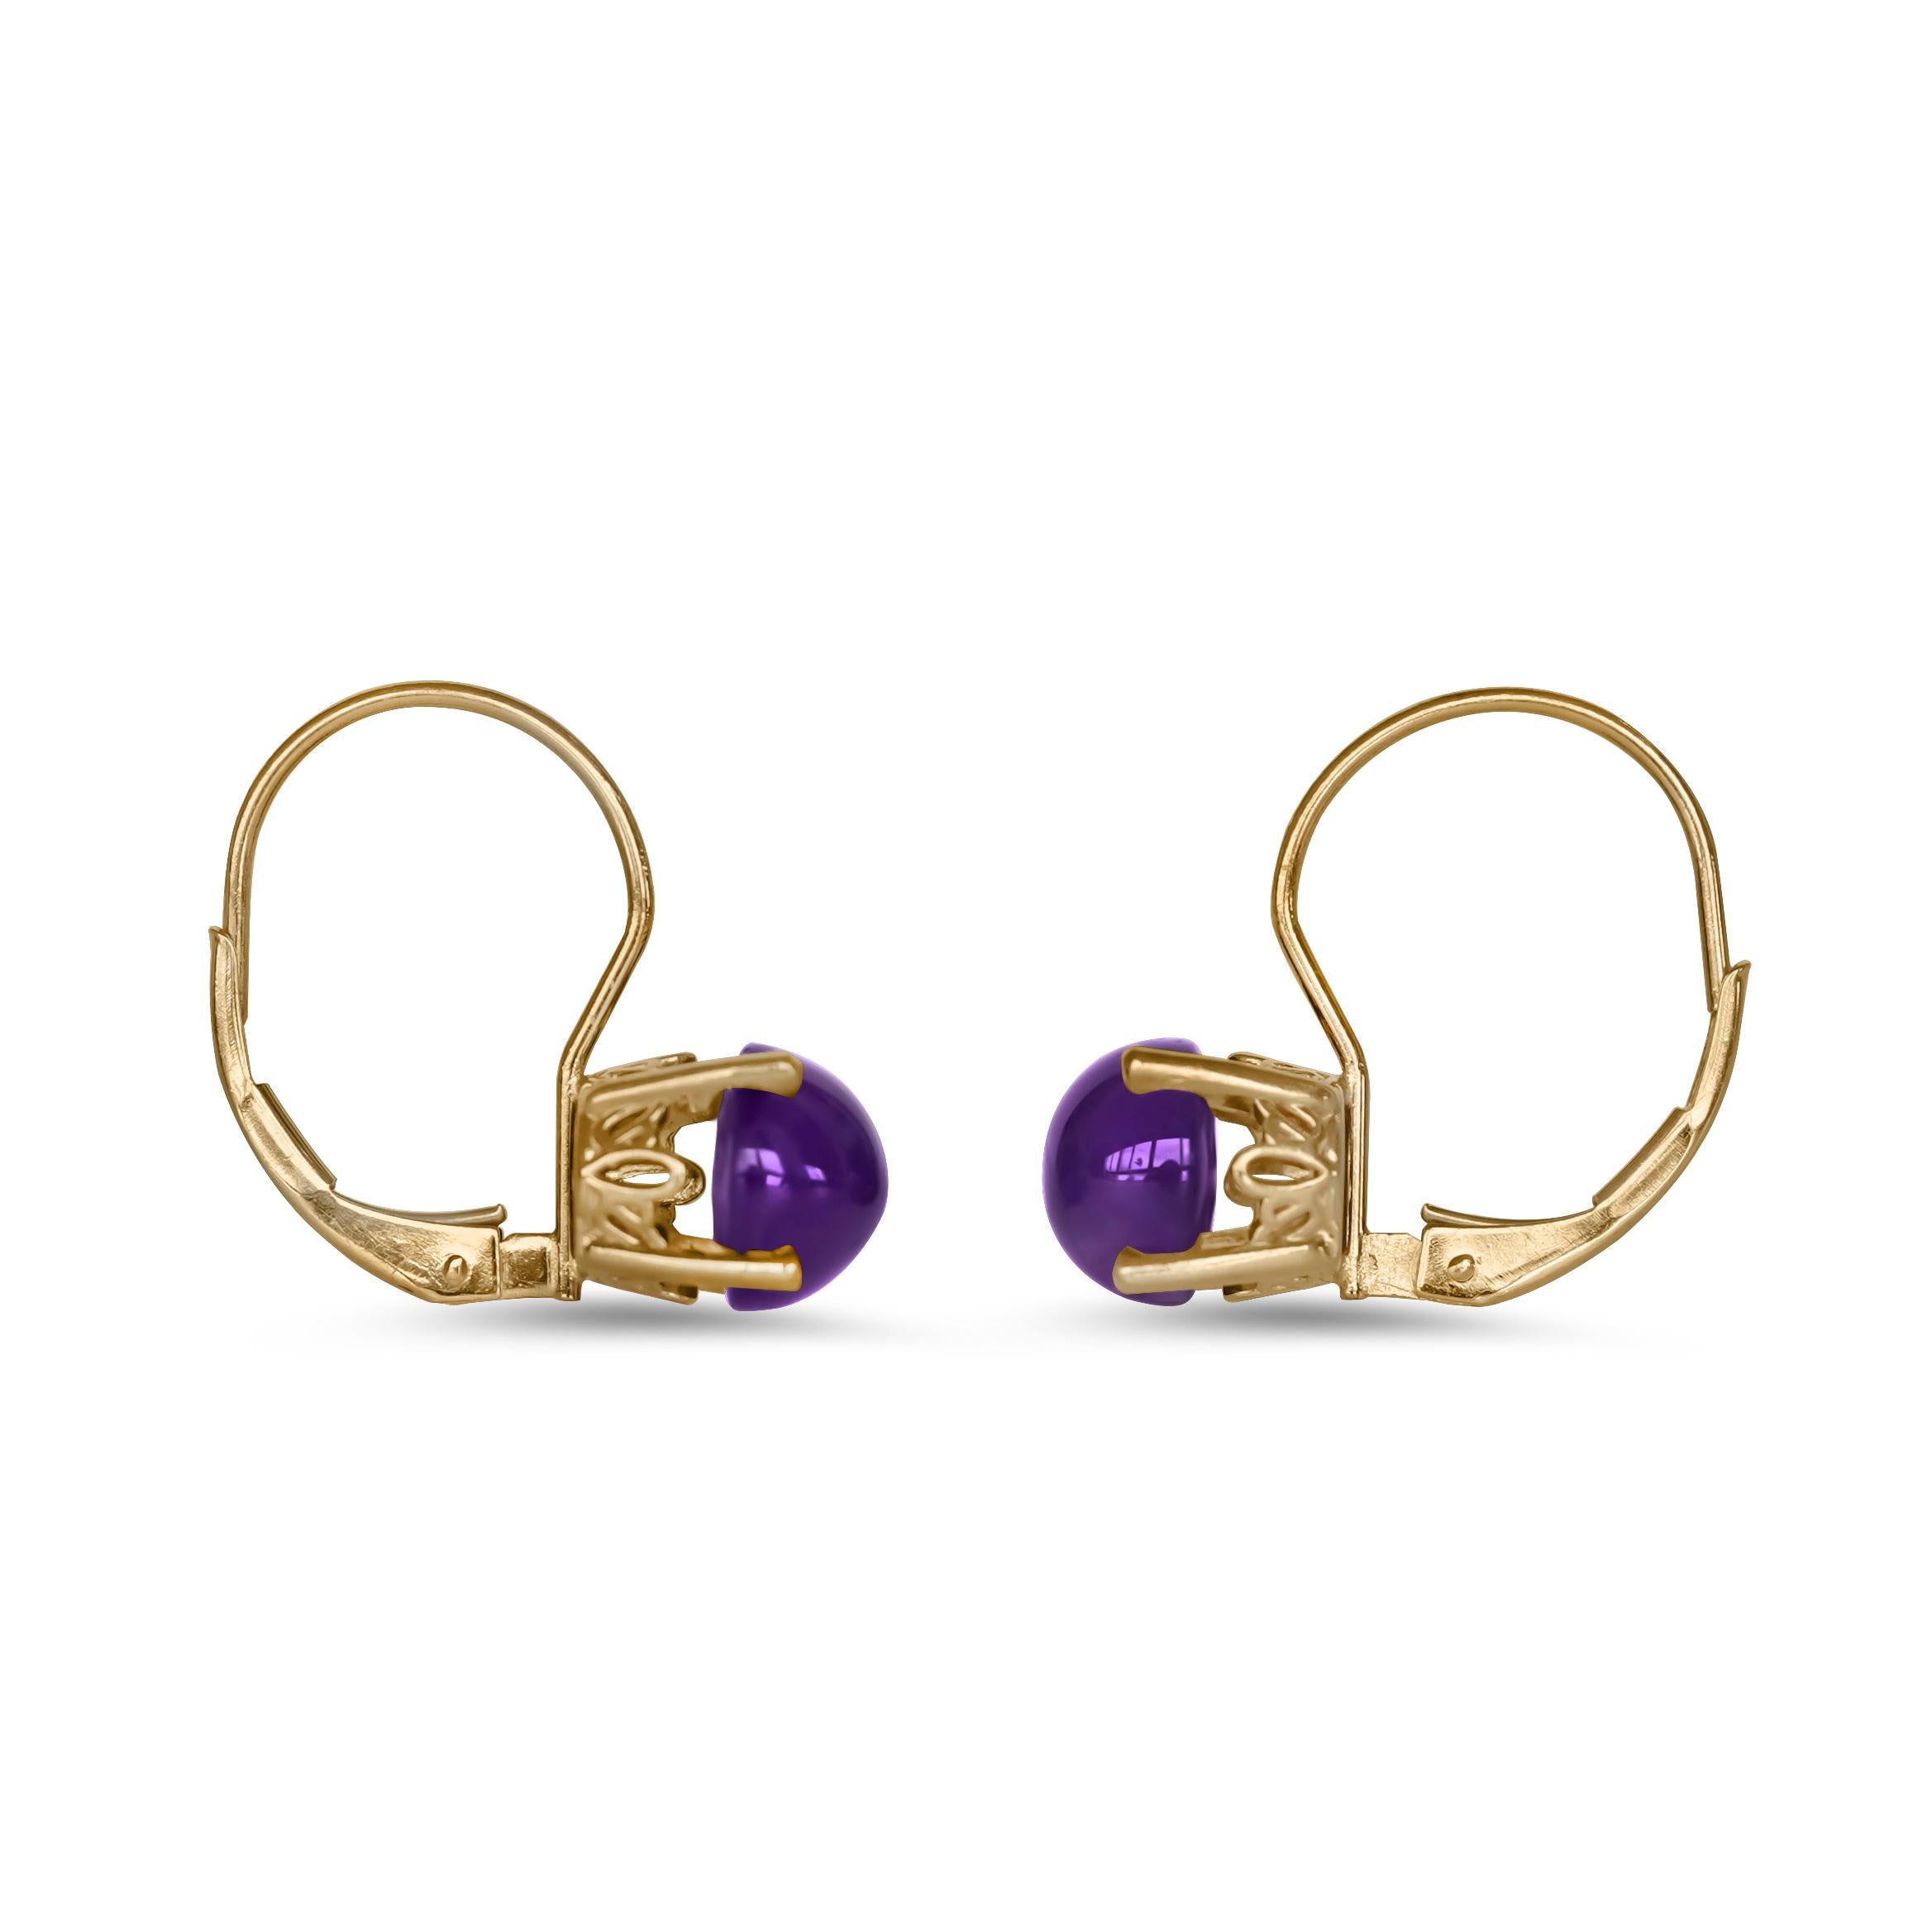 Amethyst Cabochons Lever-back Earrings in 14K Gold.
Earring length: 16.44 mm.
Amethyst dimensions: 2.00 carat, 7.1 mm.
Total weight: 2.48 grams.
